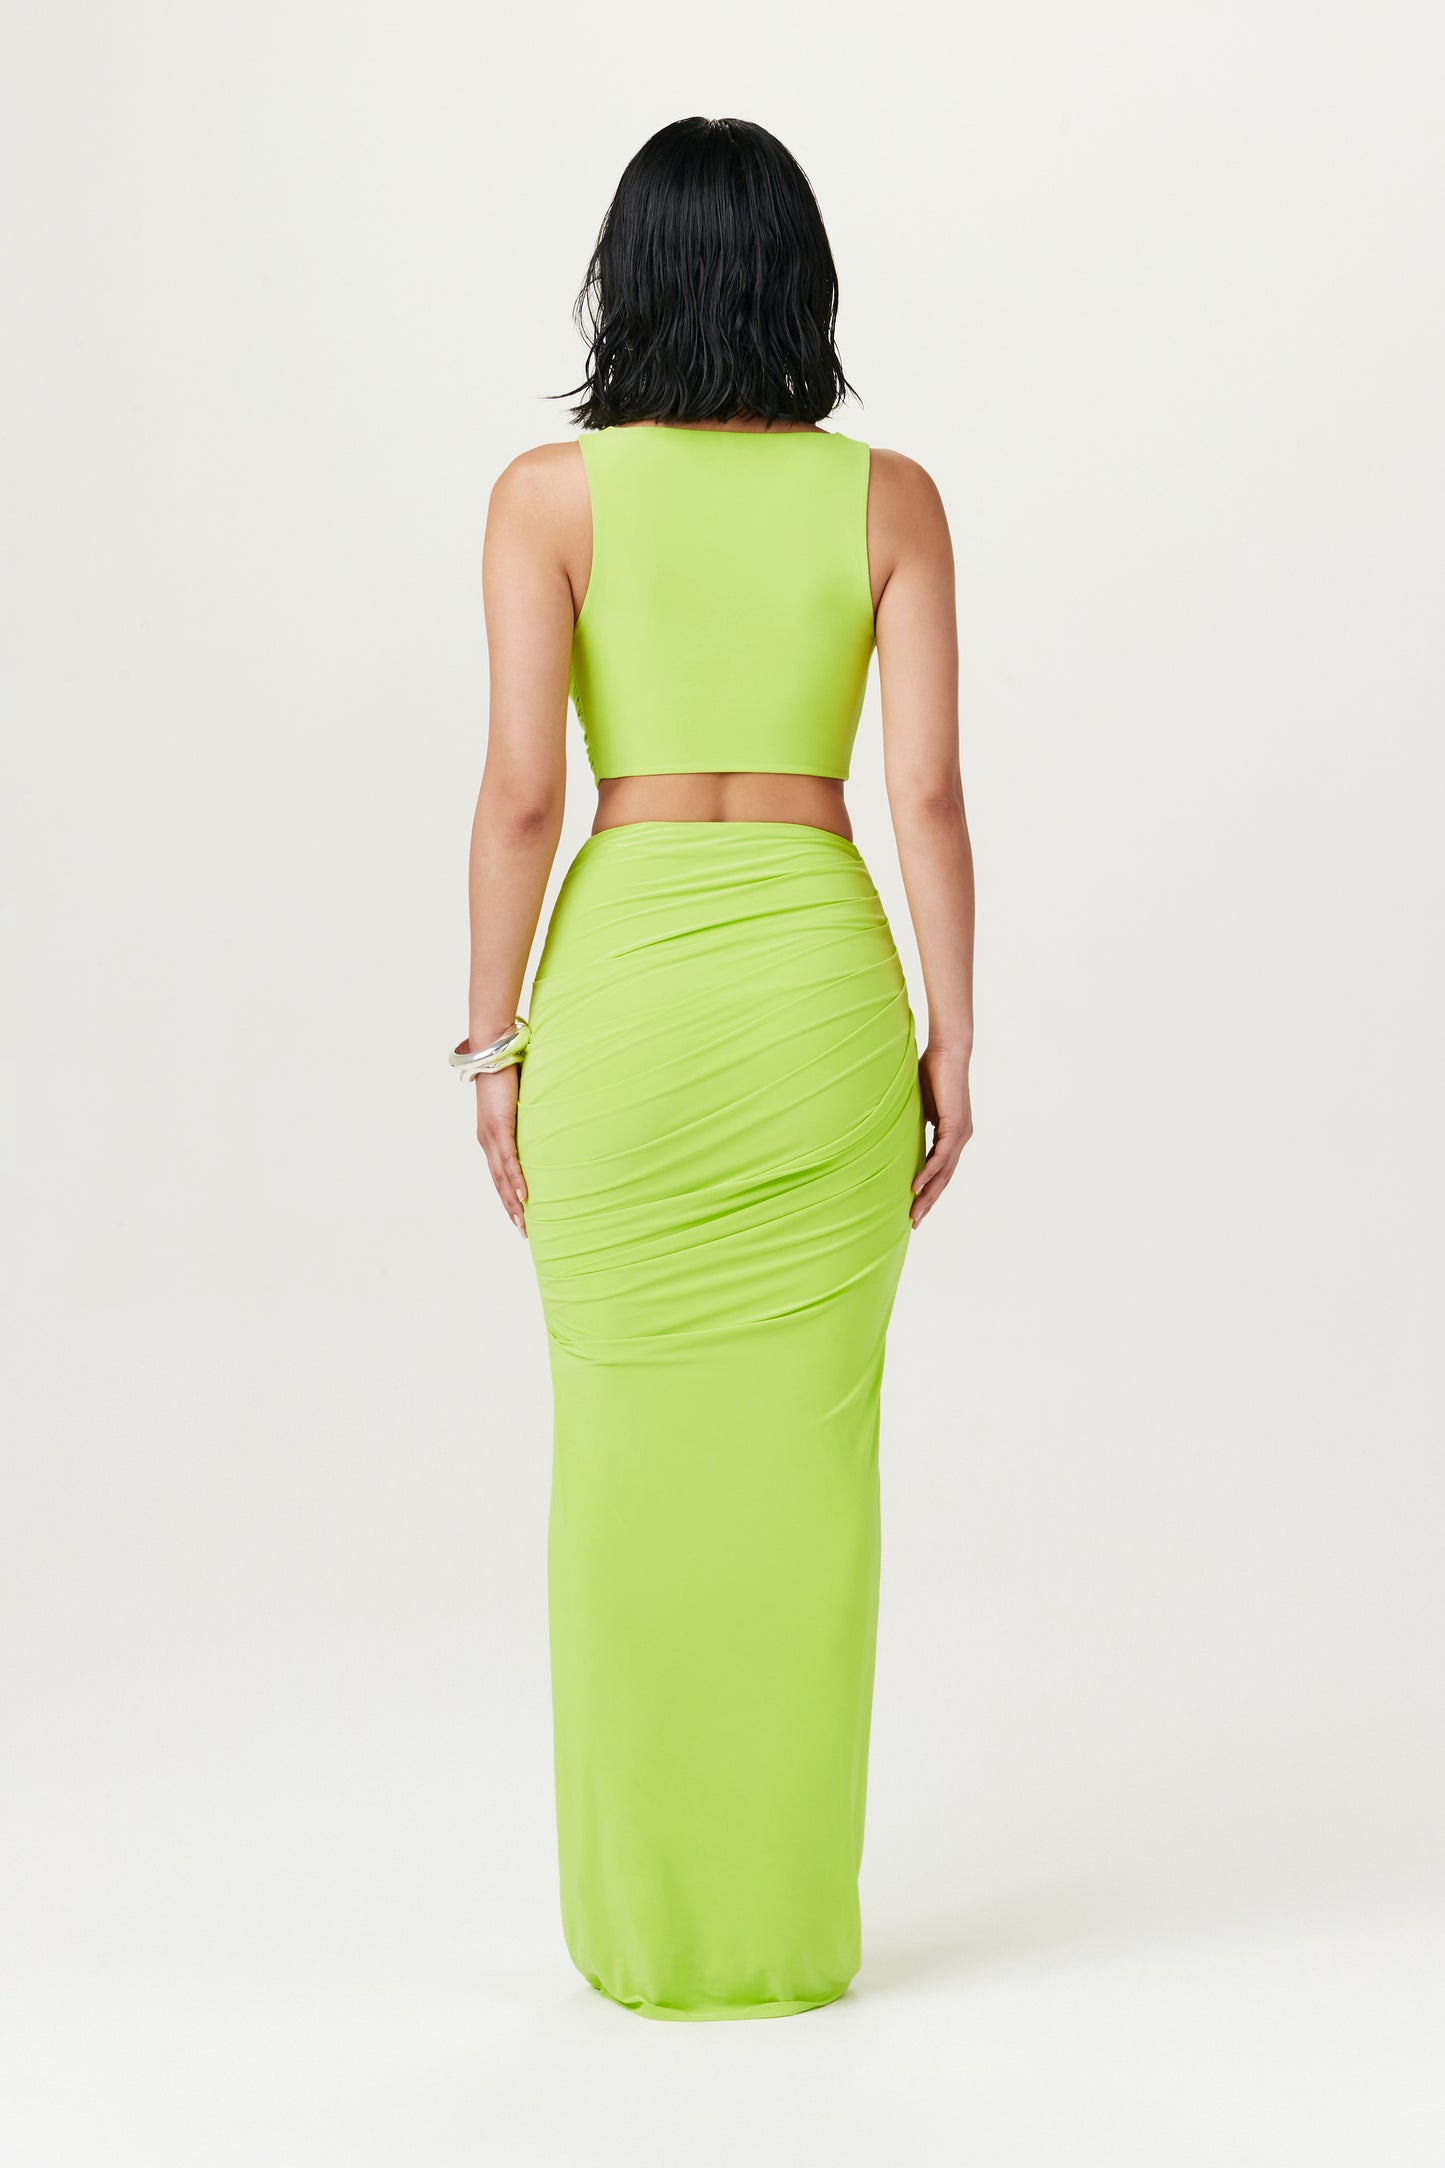 view of woman wearing lime green maxi skirt and top combo from behind